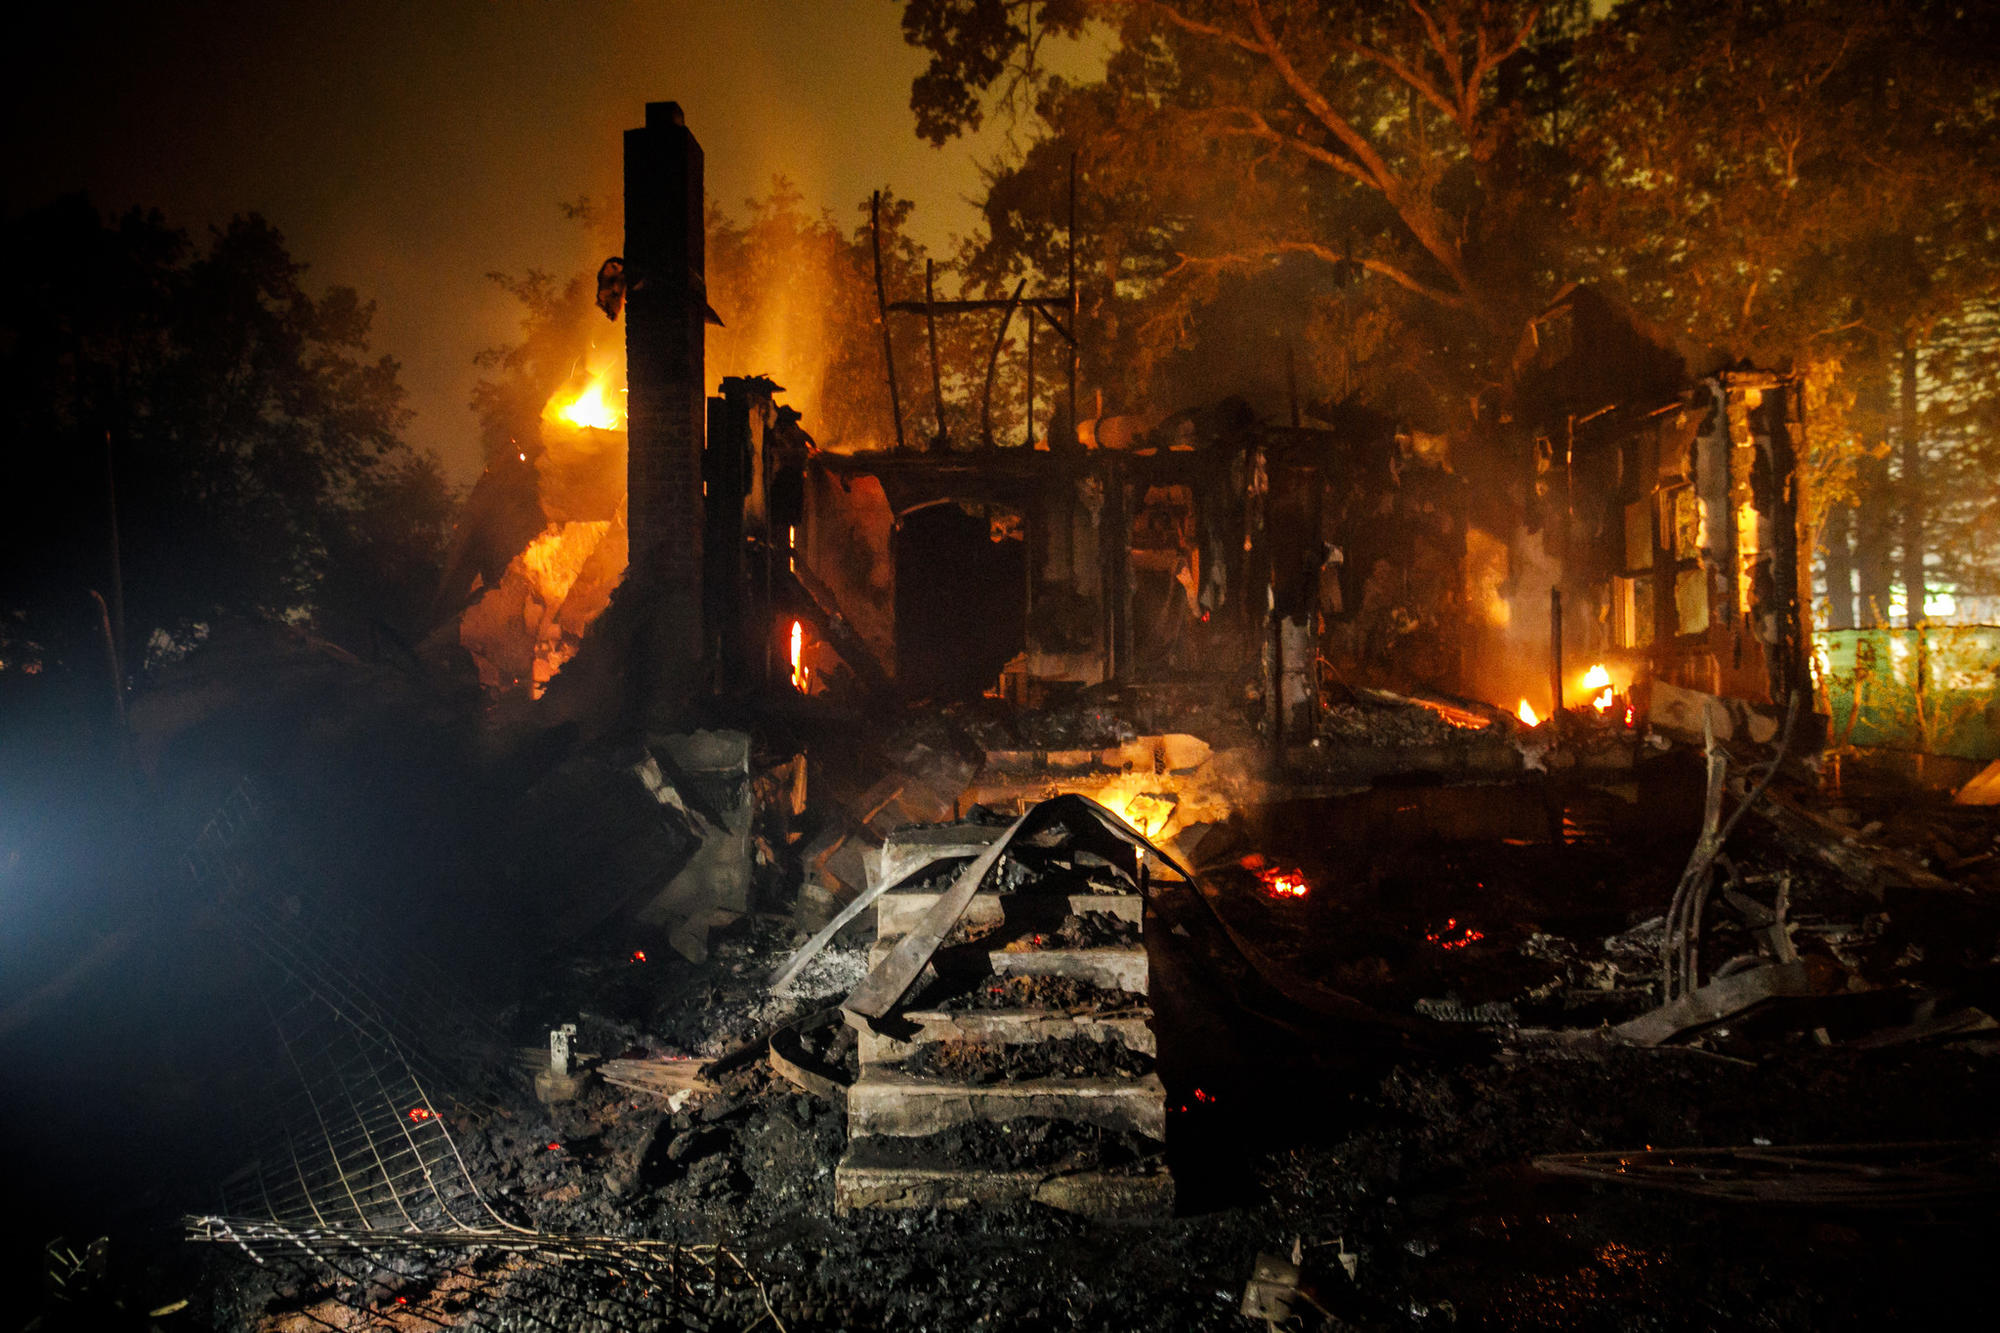 A home destroyed in the fast-moving wildfire that ripped through Glen Ellen in Sonoma County.